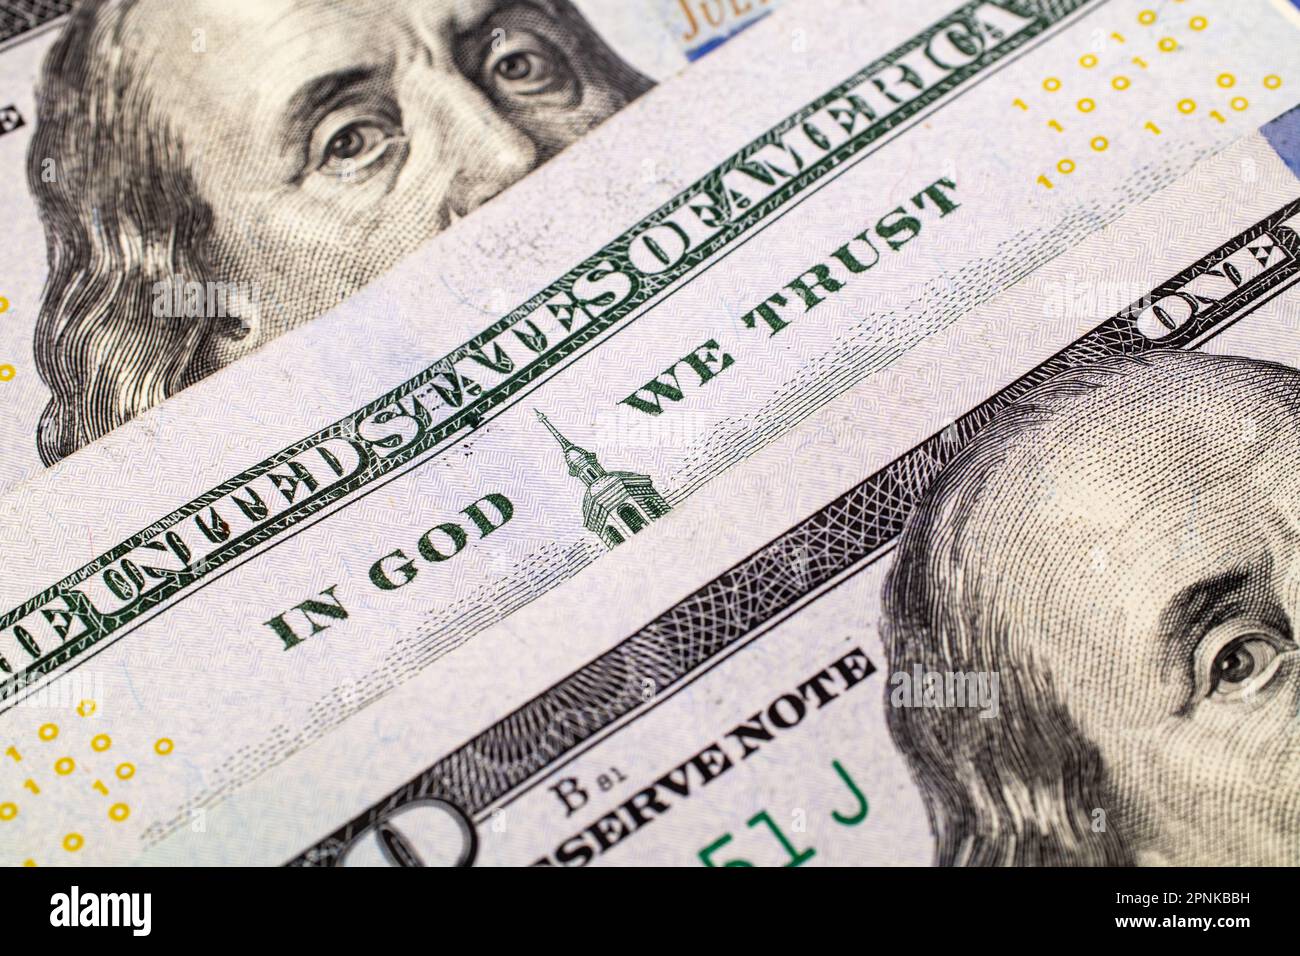 Extreme close-up of one hundred bill. Macro. American paper money. A $100 bill with focus on In God We Trust. US banknotes close-up. Business economy Stock Photo